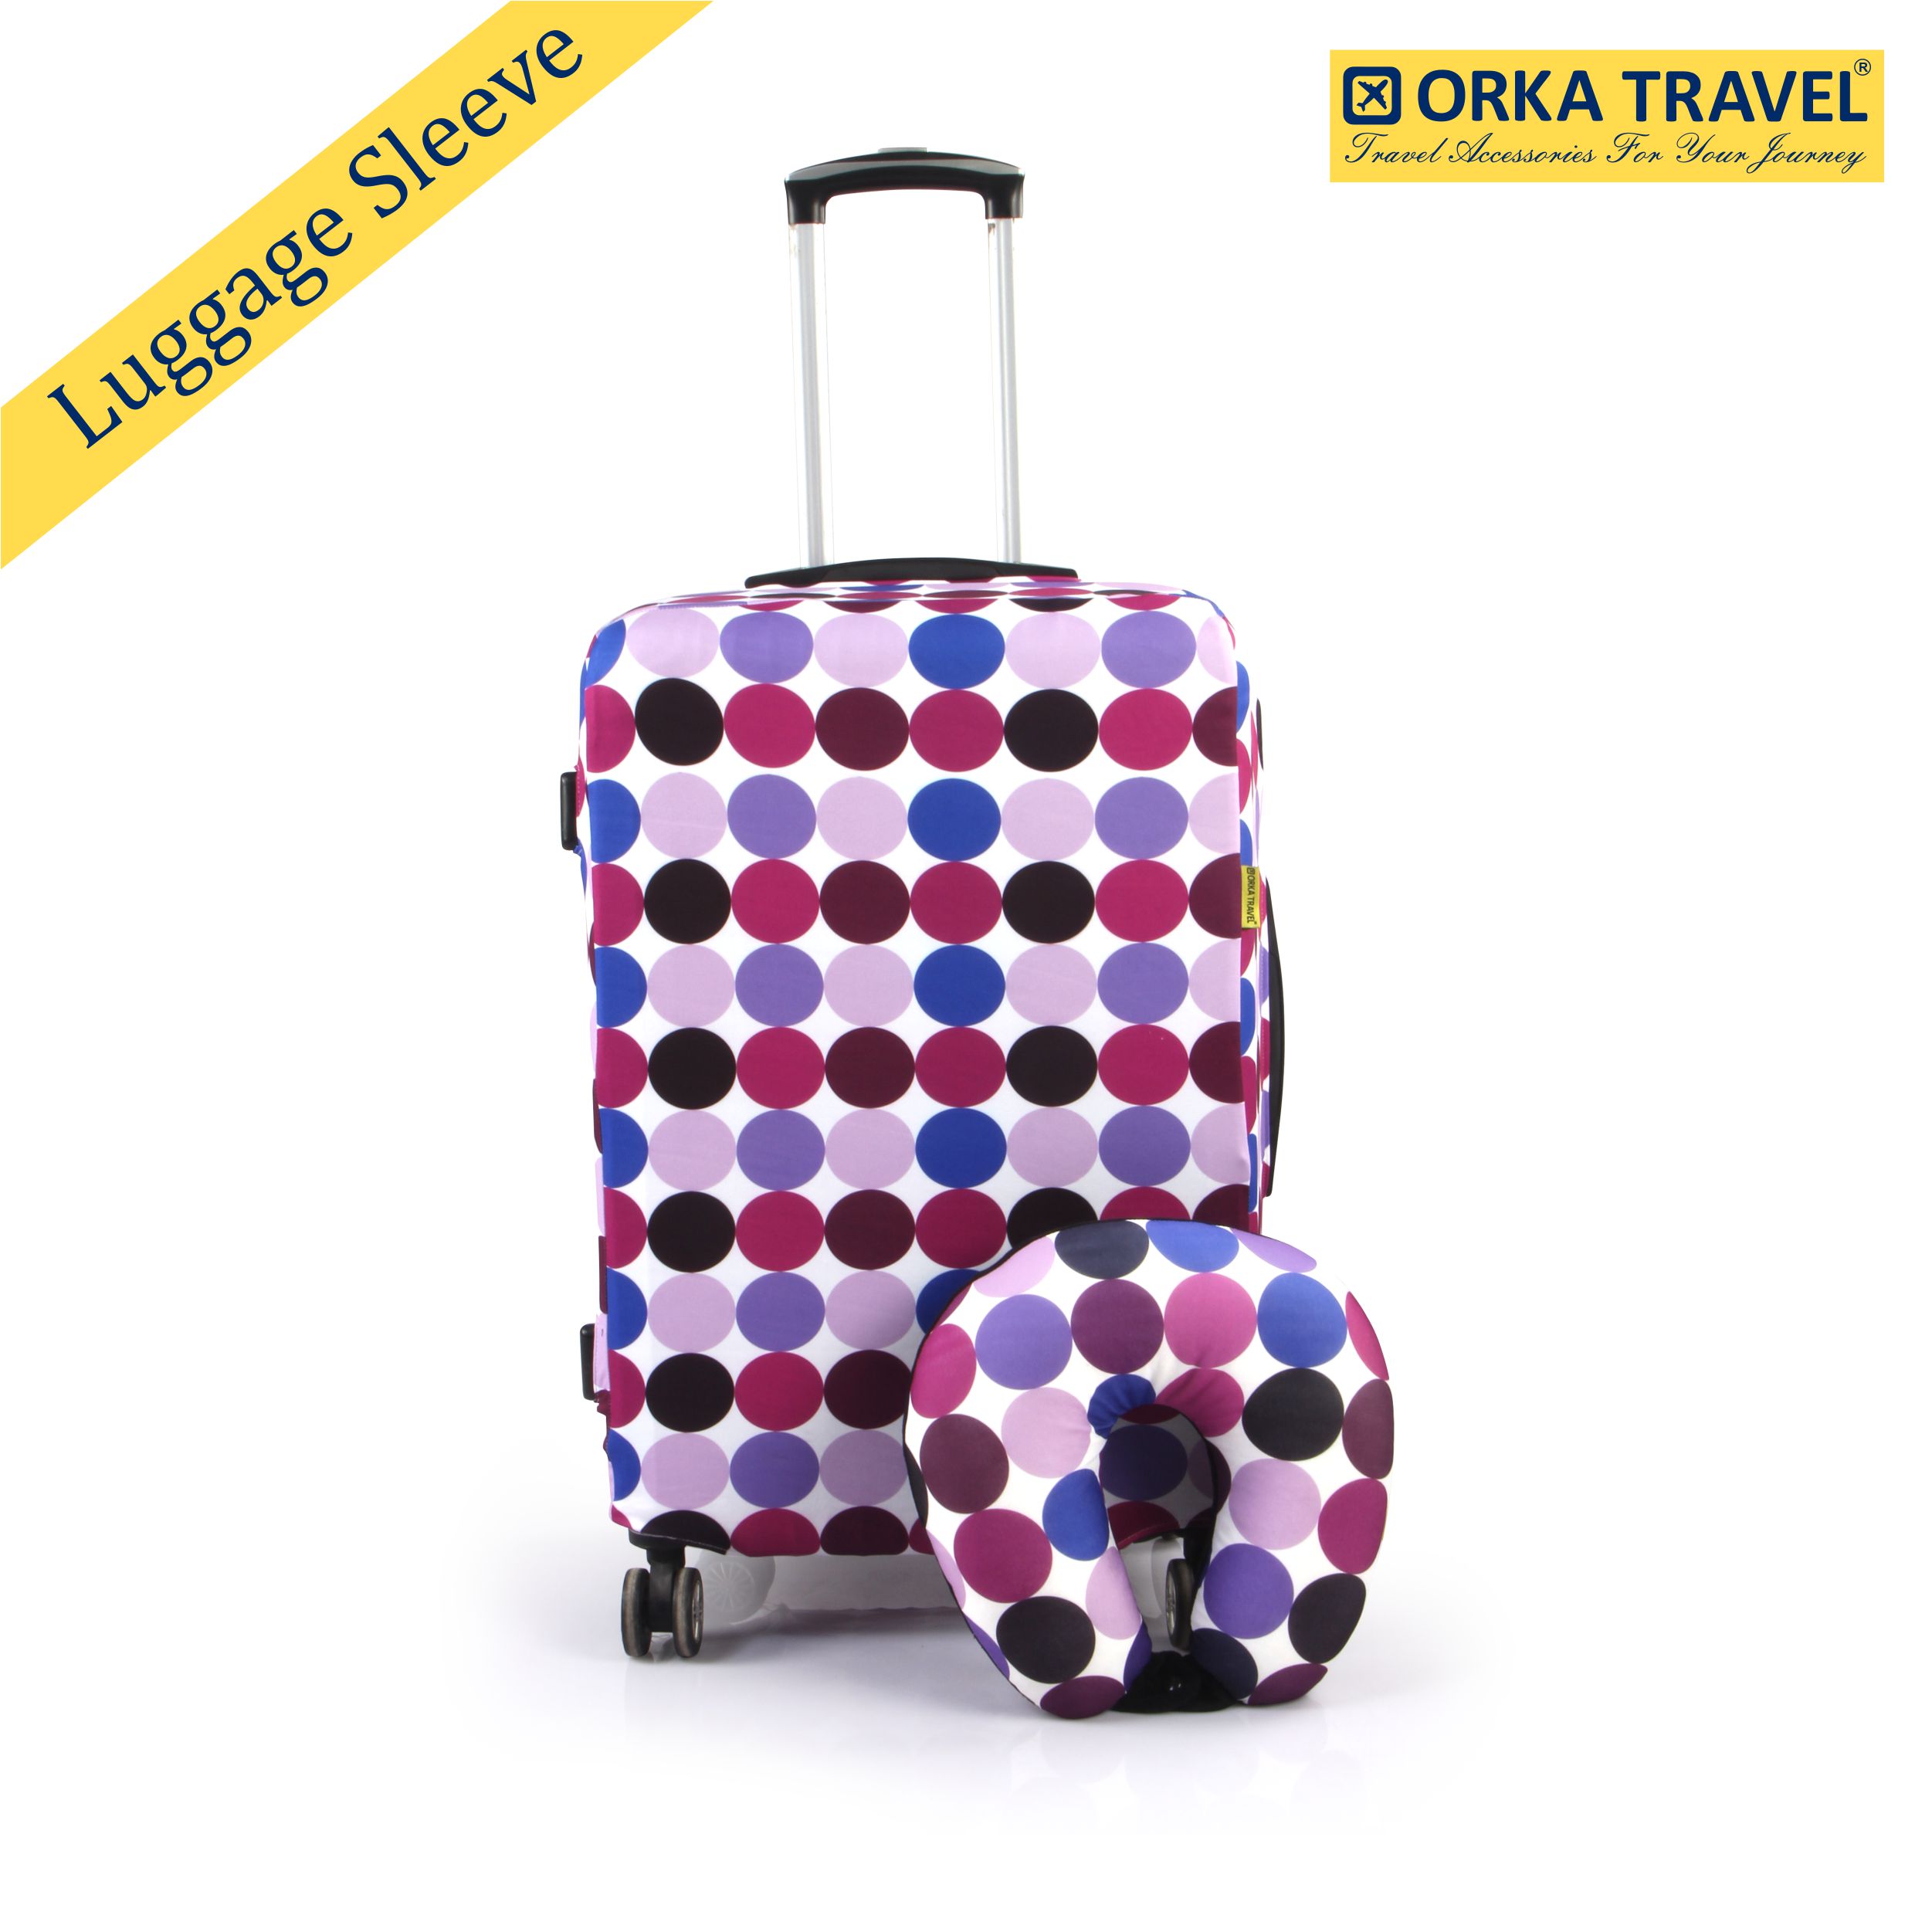 ORKA TRAVEL Polka Dots Theme LUGGAGE PROTECTOR WITH MATCHING U NECK PILLOW LUGGAGE COVER  